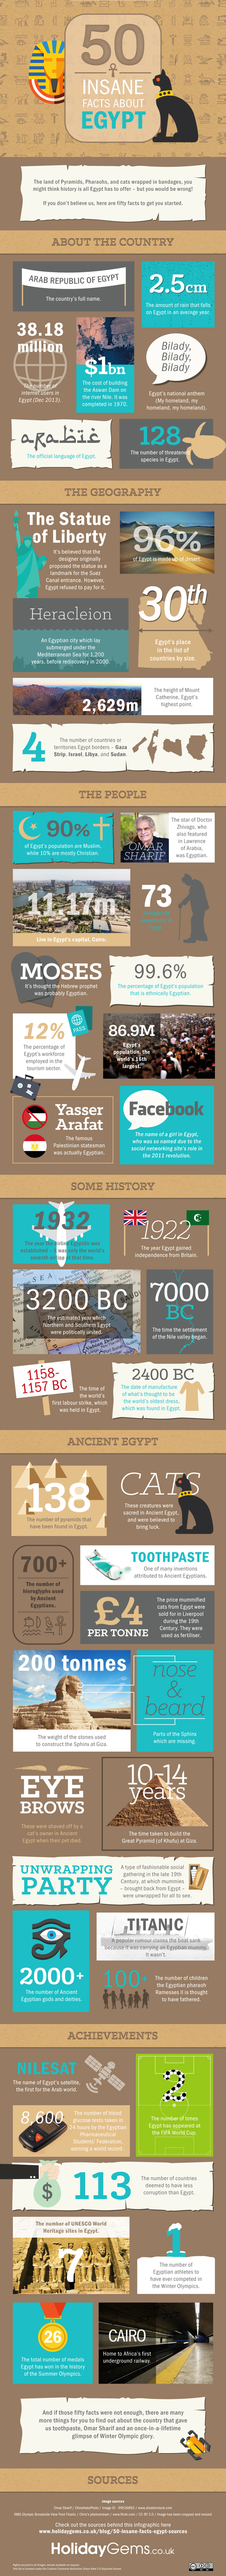 50 Interesting Facts About Egypt - Travel infographic